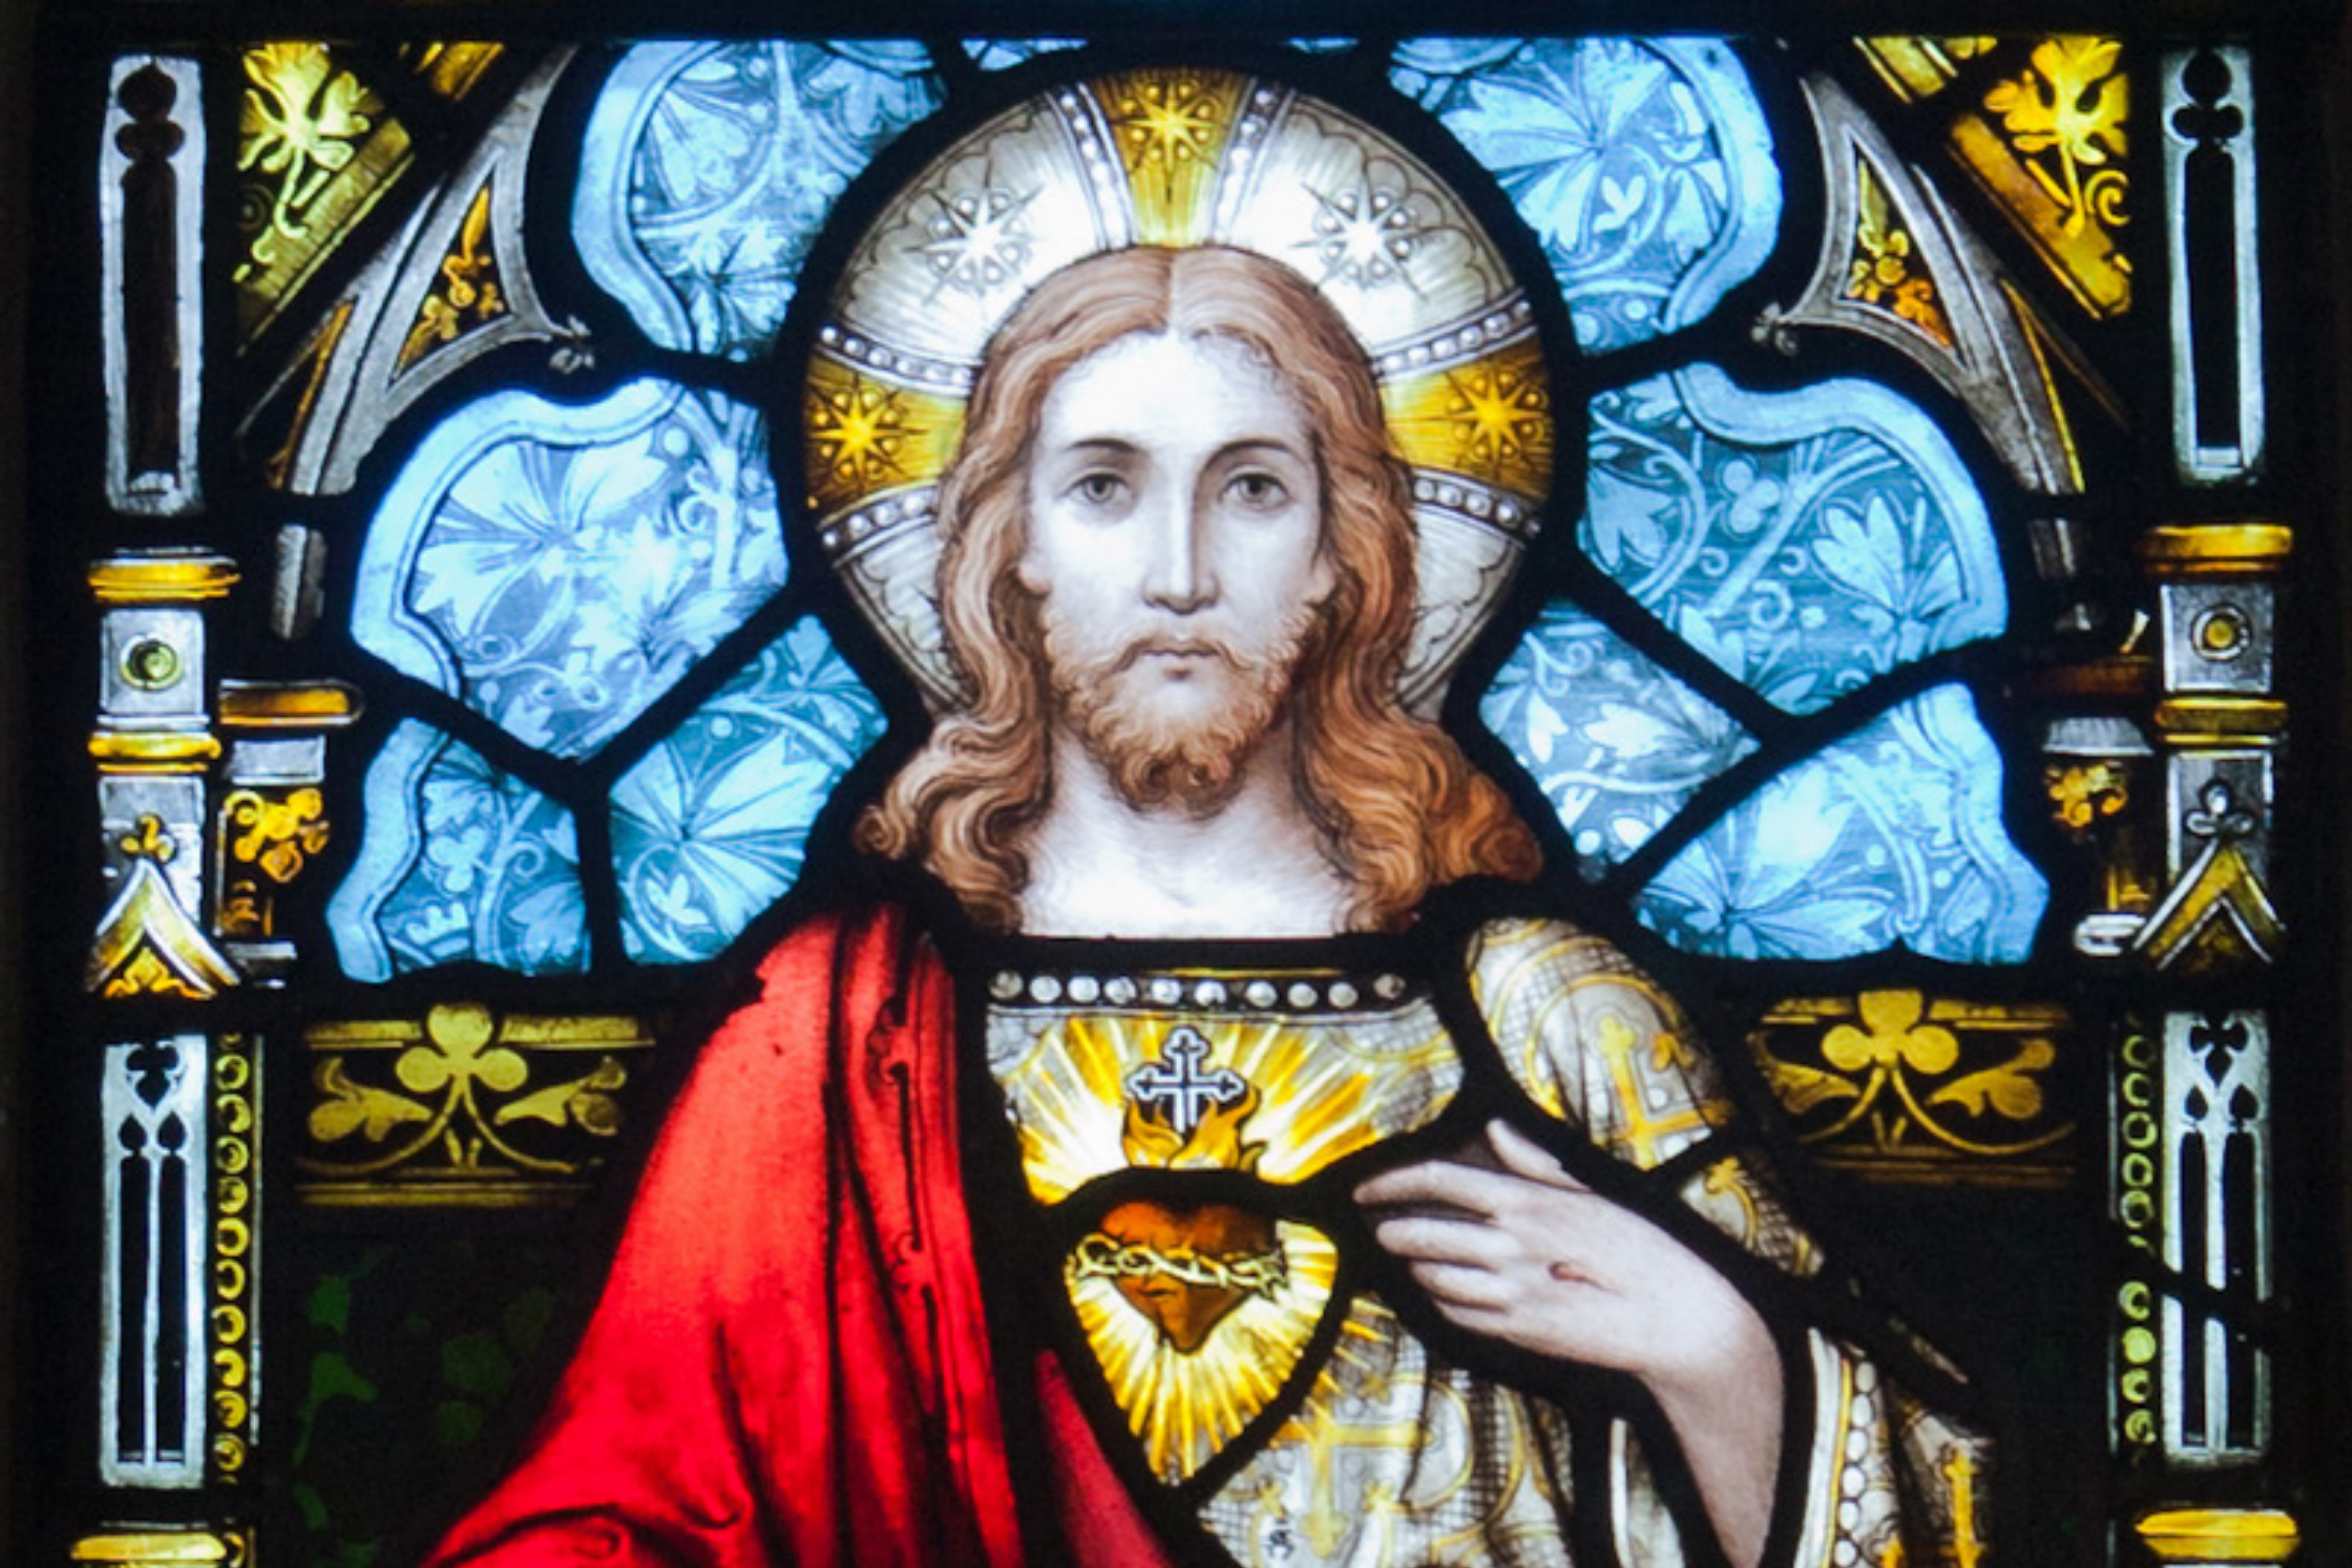 Stained glass image of the Sacred Heart of Jesus.